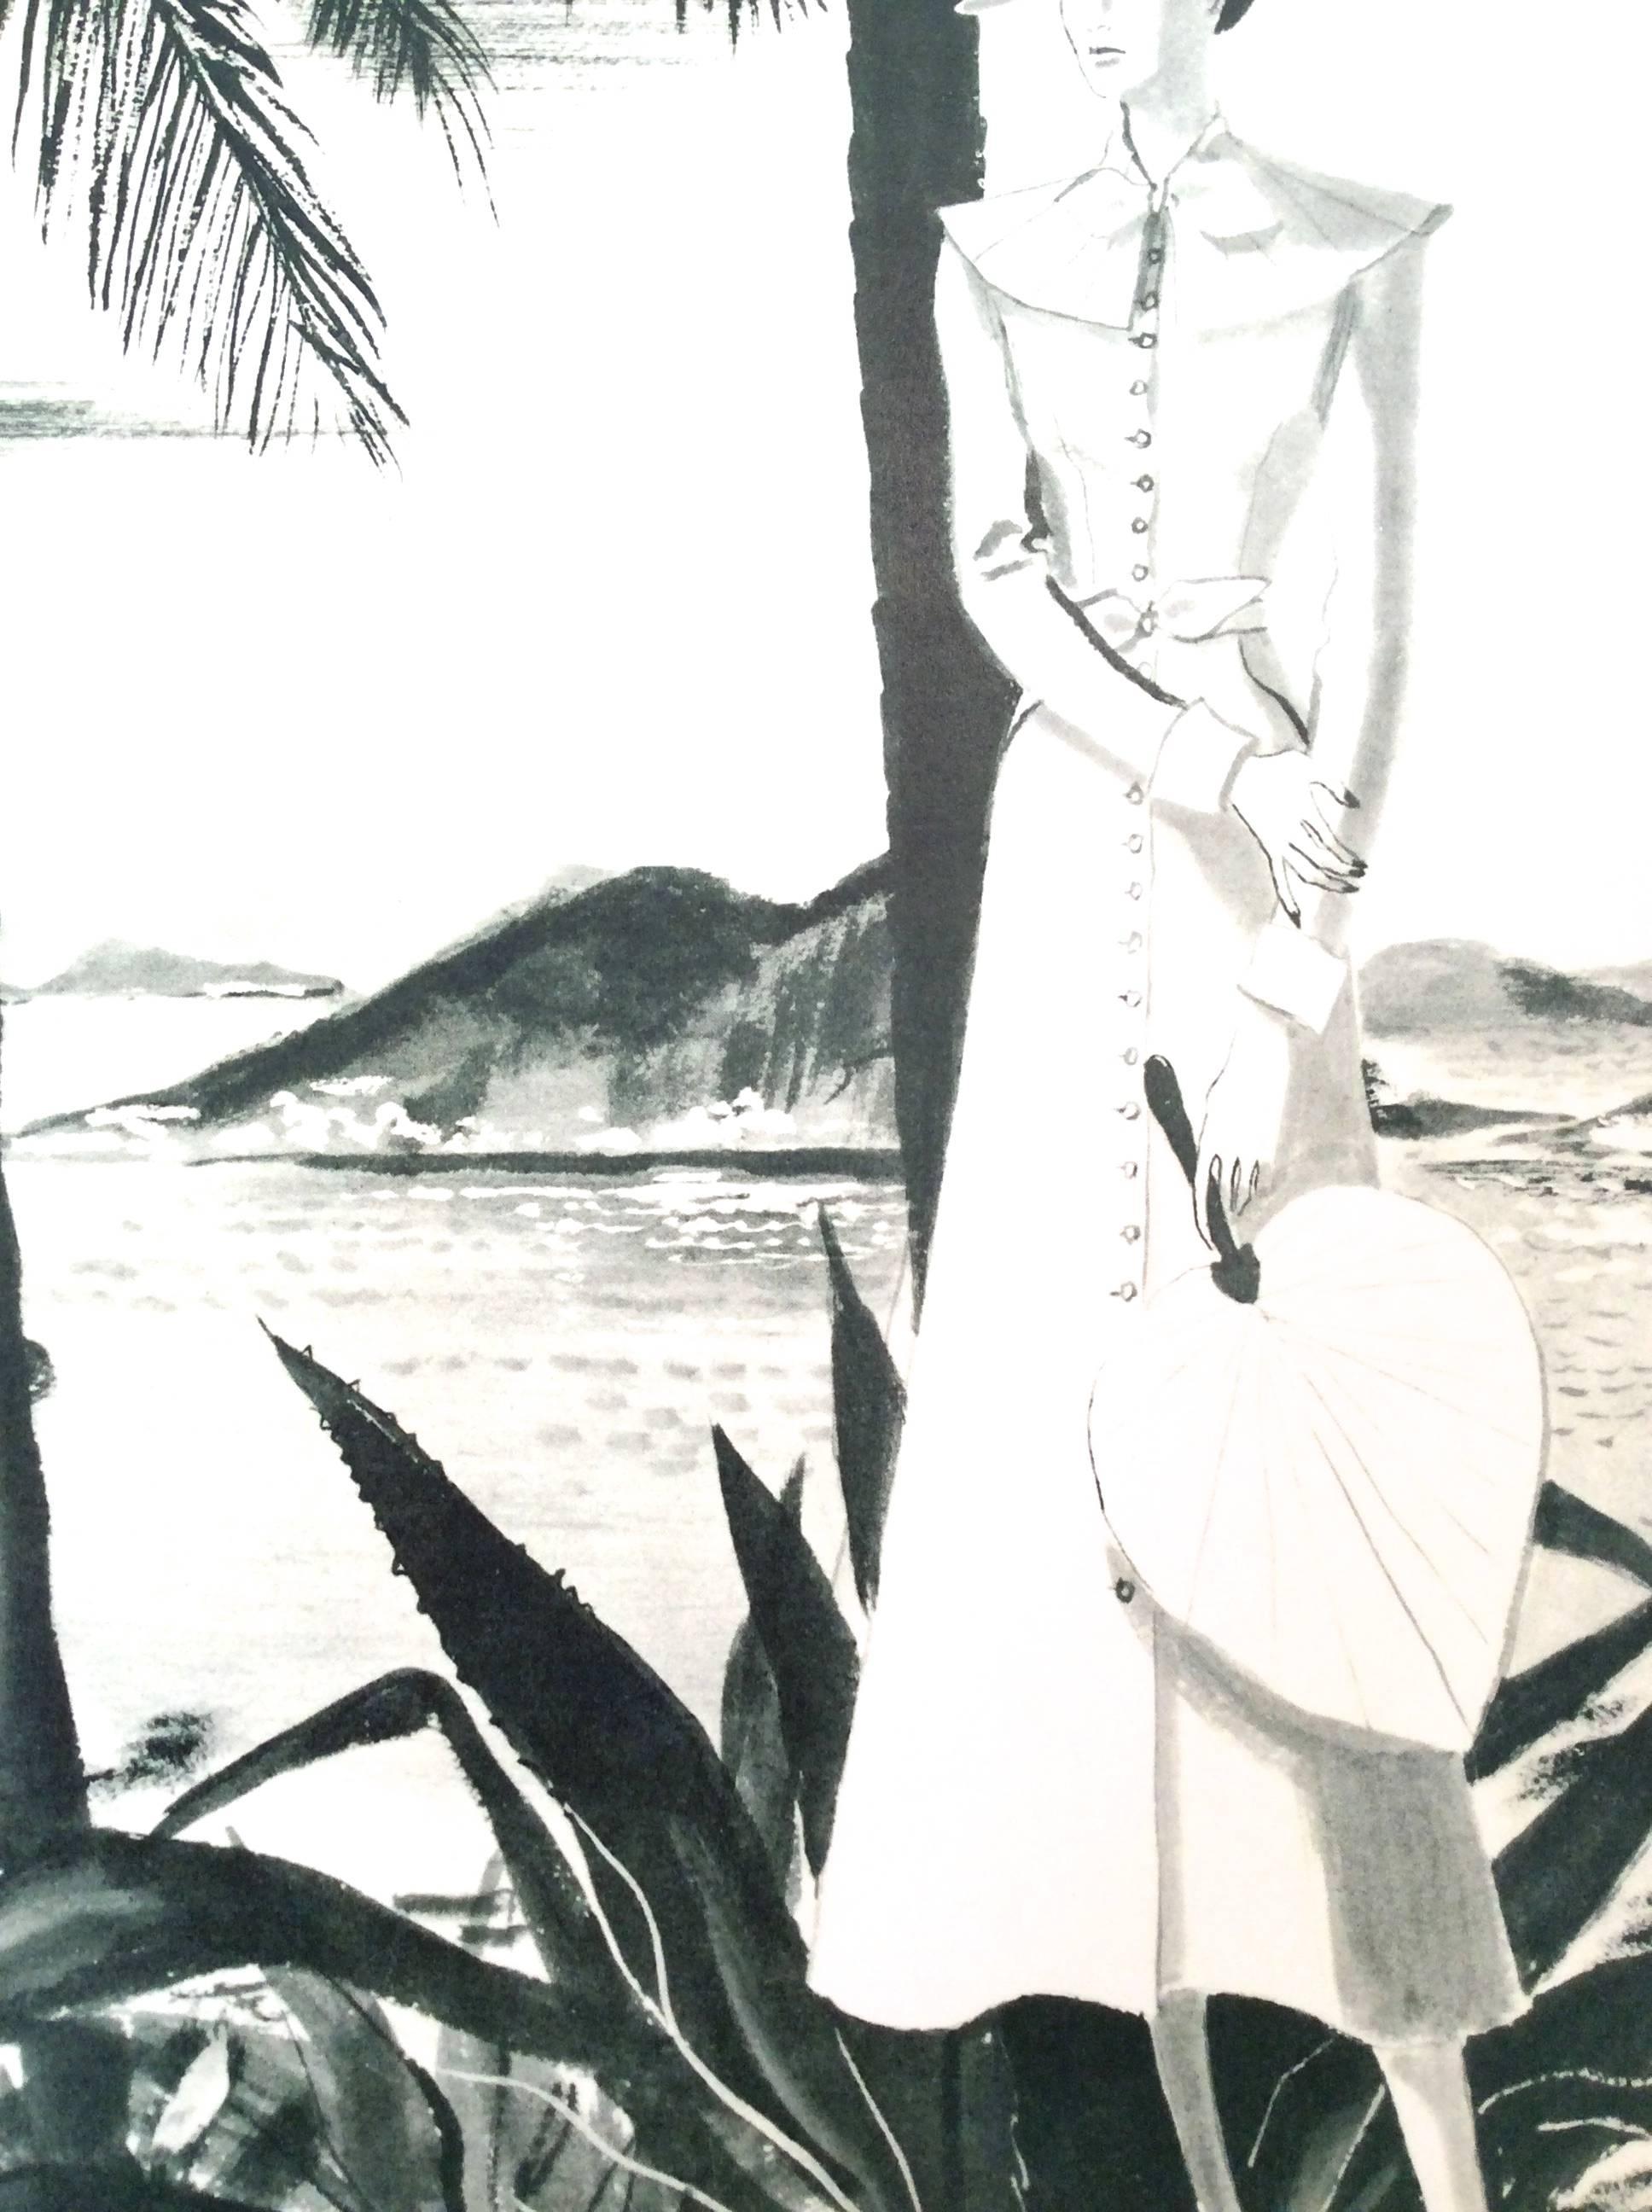  Chanel Vintage Ad Print - 1930's Rare In Excellent Condition For Sale In Boca Raton, FL